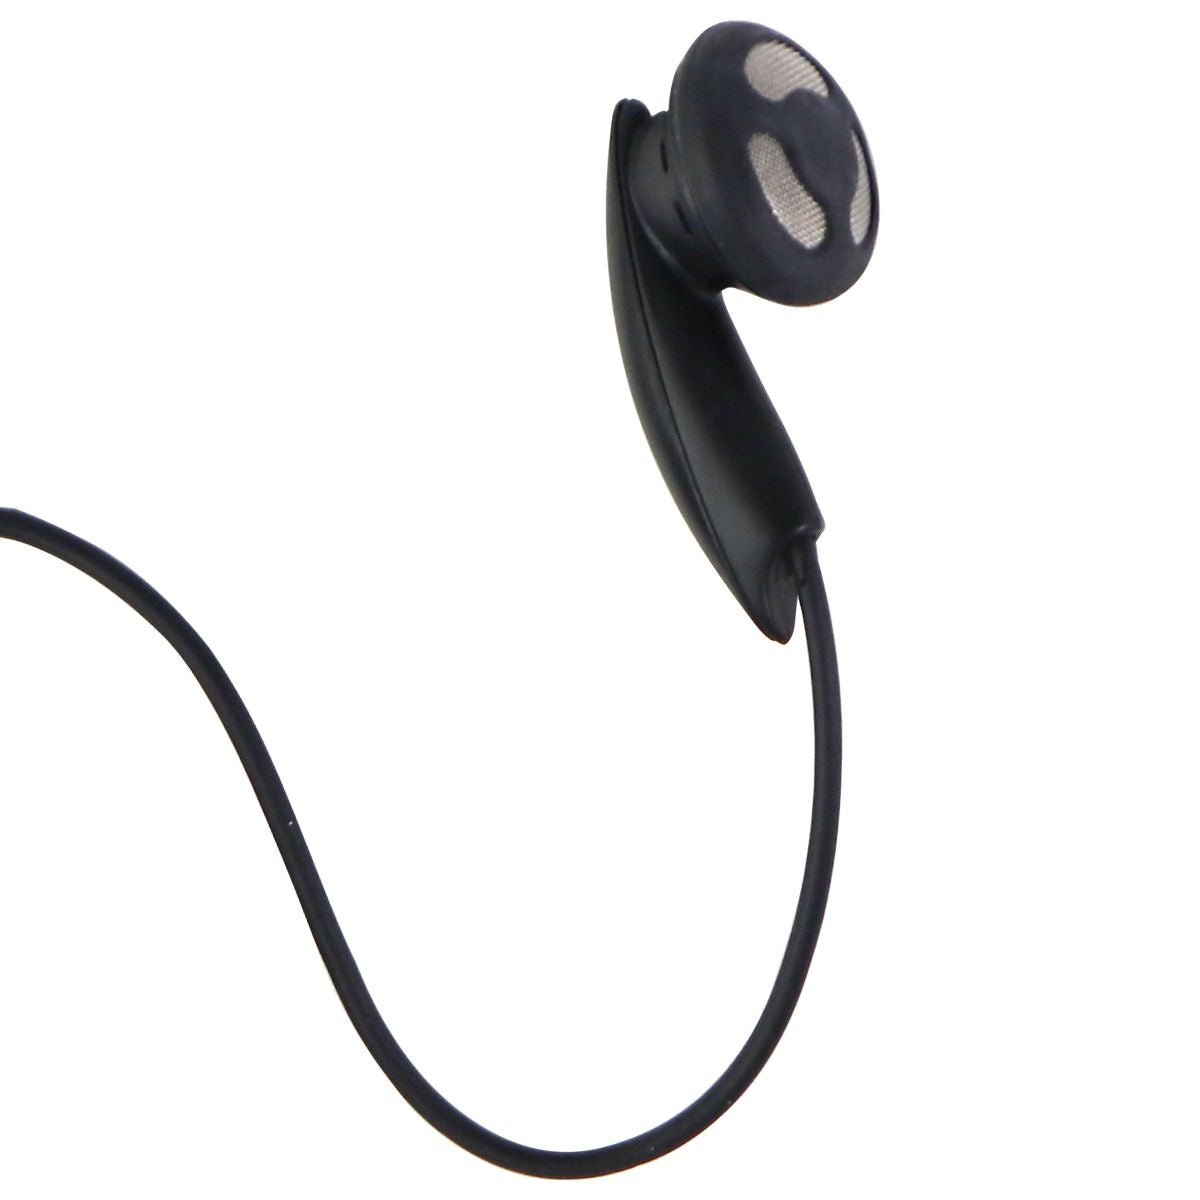 LG 2.5mm Mono Headset with Microphone and Call/Answer Button - Black SGEY0003221 Cell Phone - Headsets LG    - Simple Cell Bulk Wholesale Pricing - USA Seller